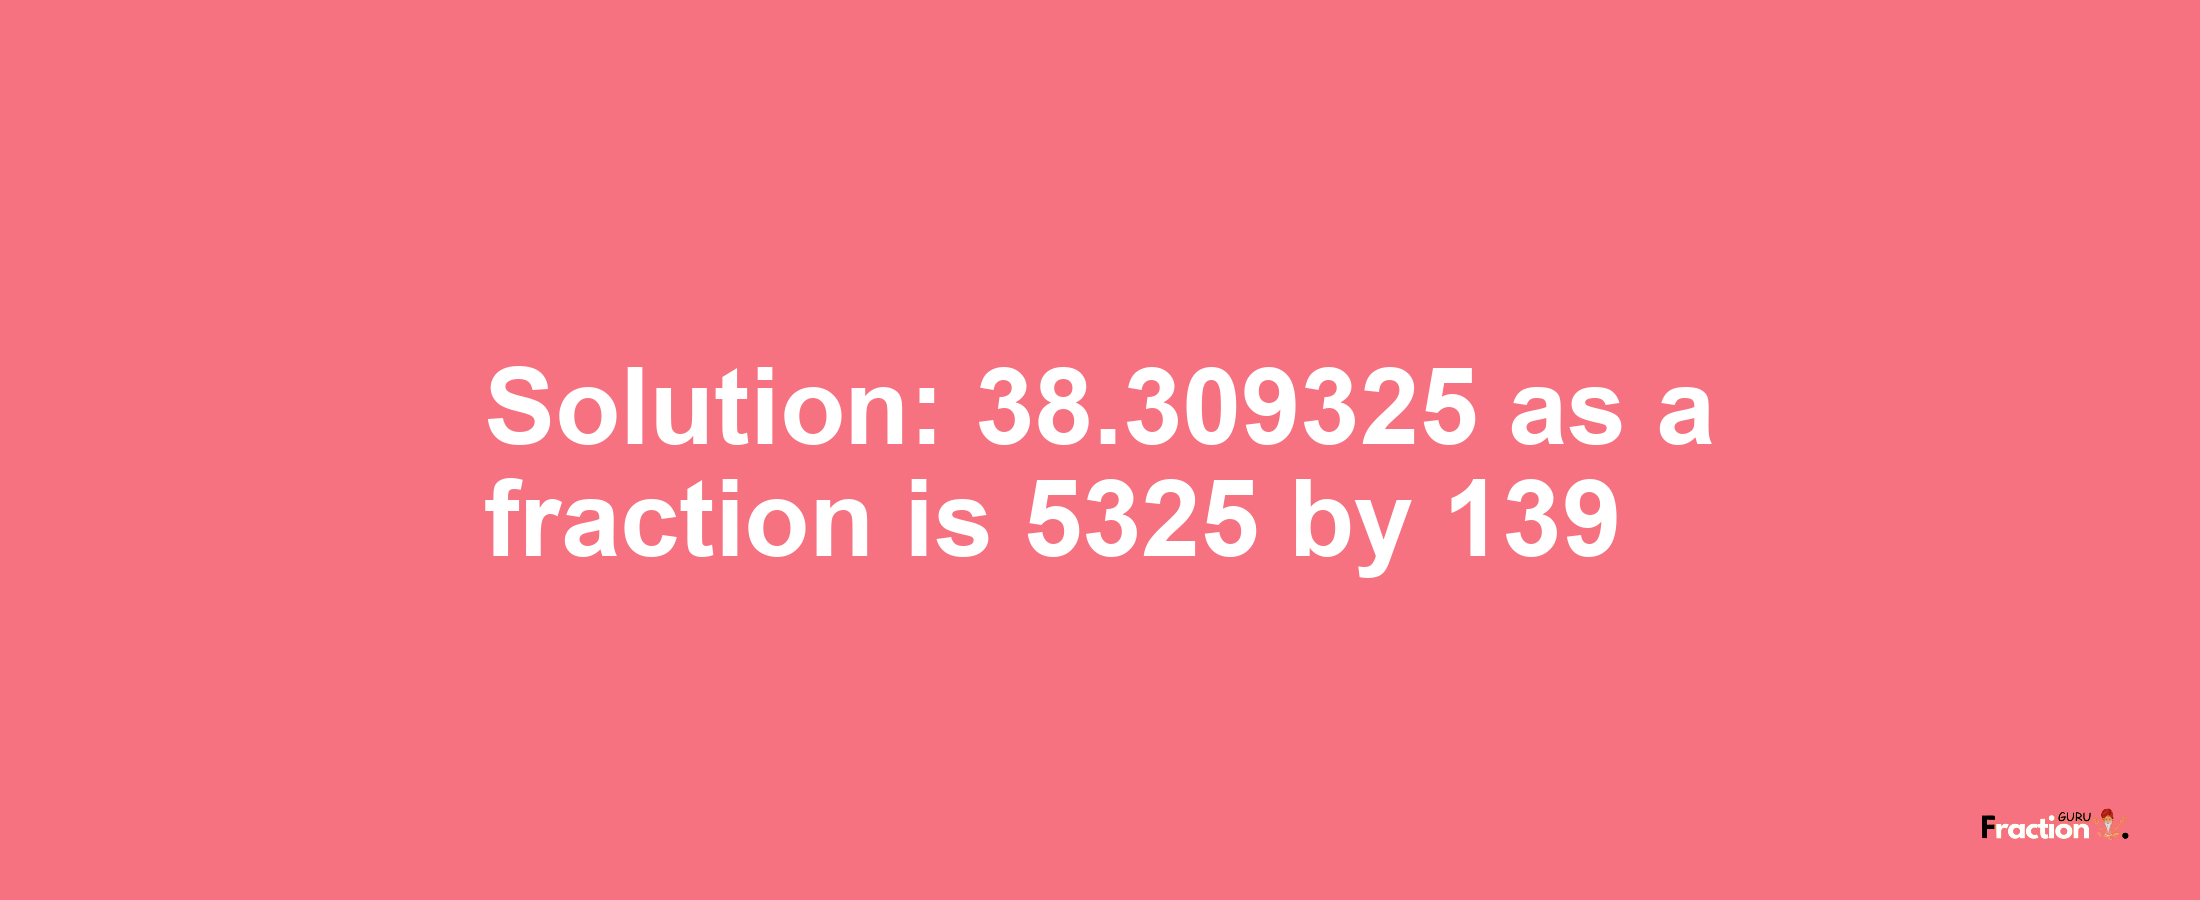 Solution:38.309325 as a fraction is 5325/139